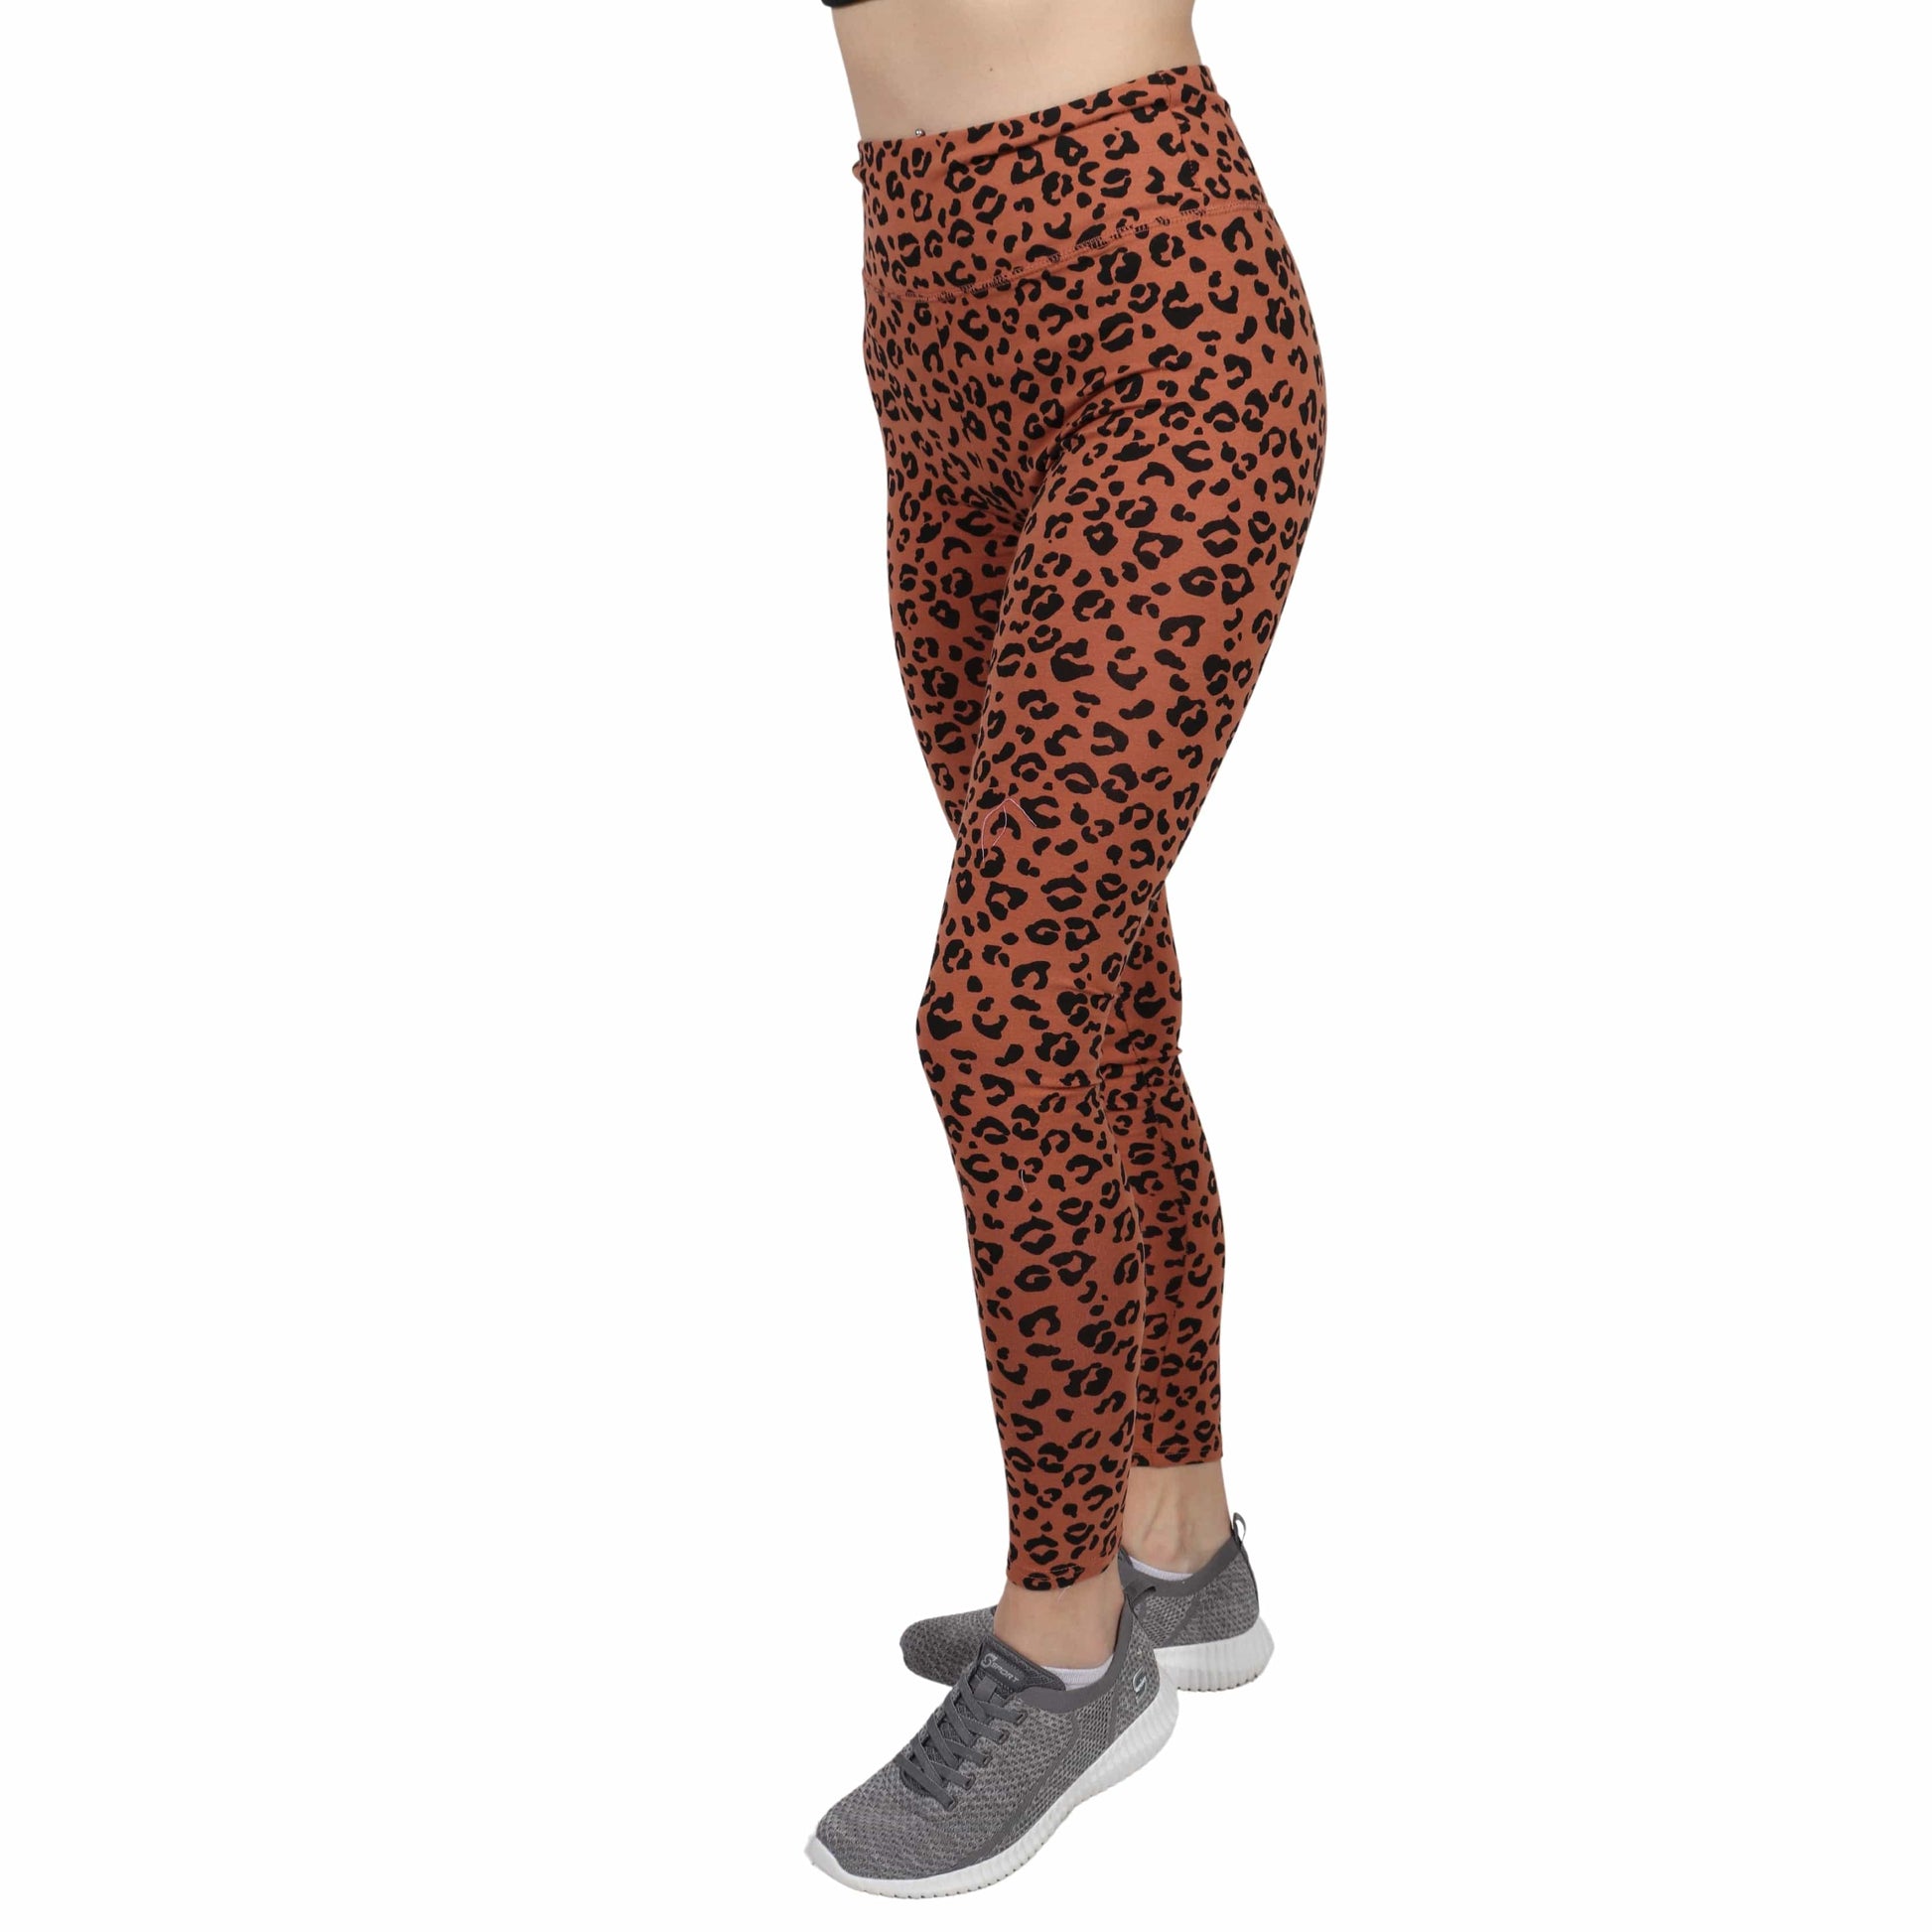 Wild Fable Women's High Waisted Classic Leopard Print Leggings Brown Black  XL 